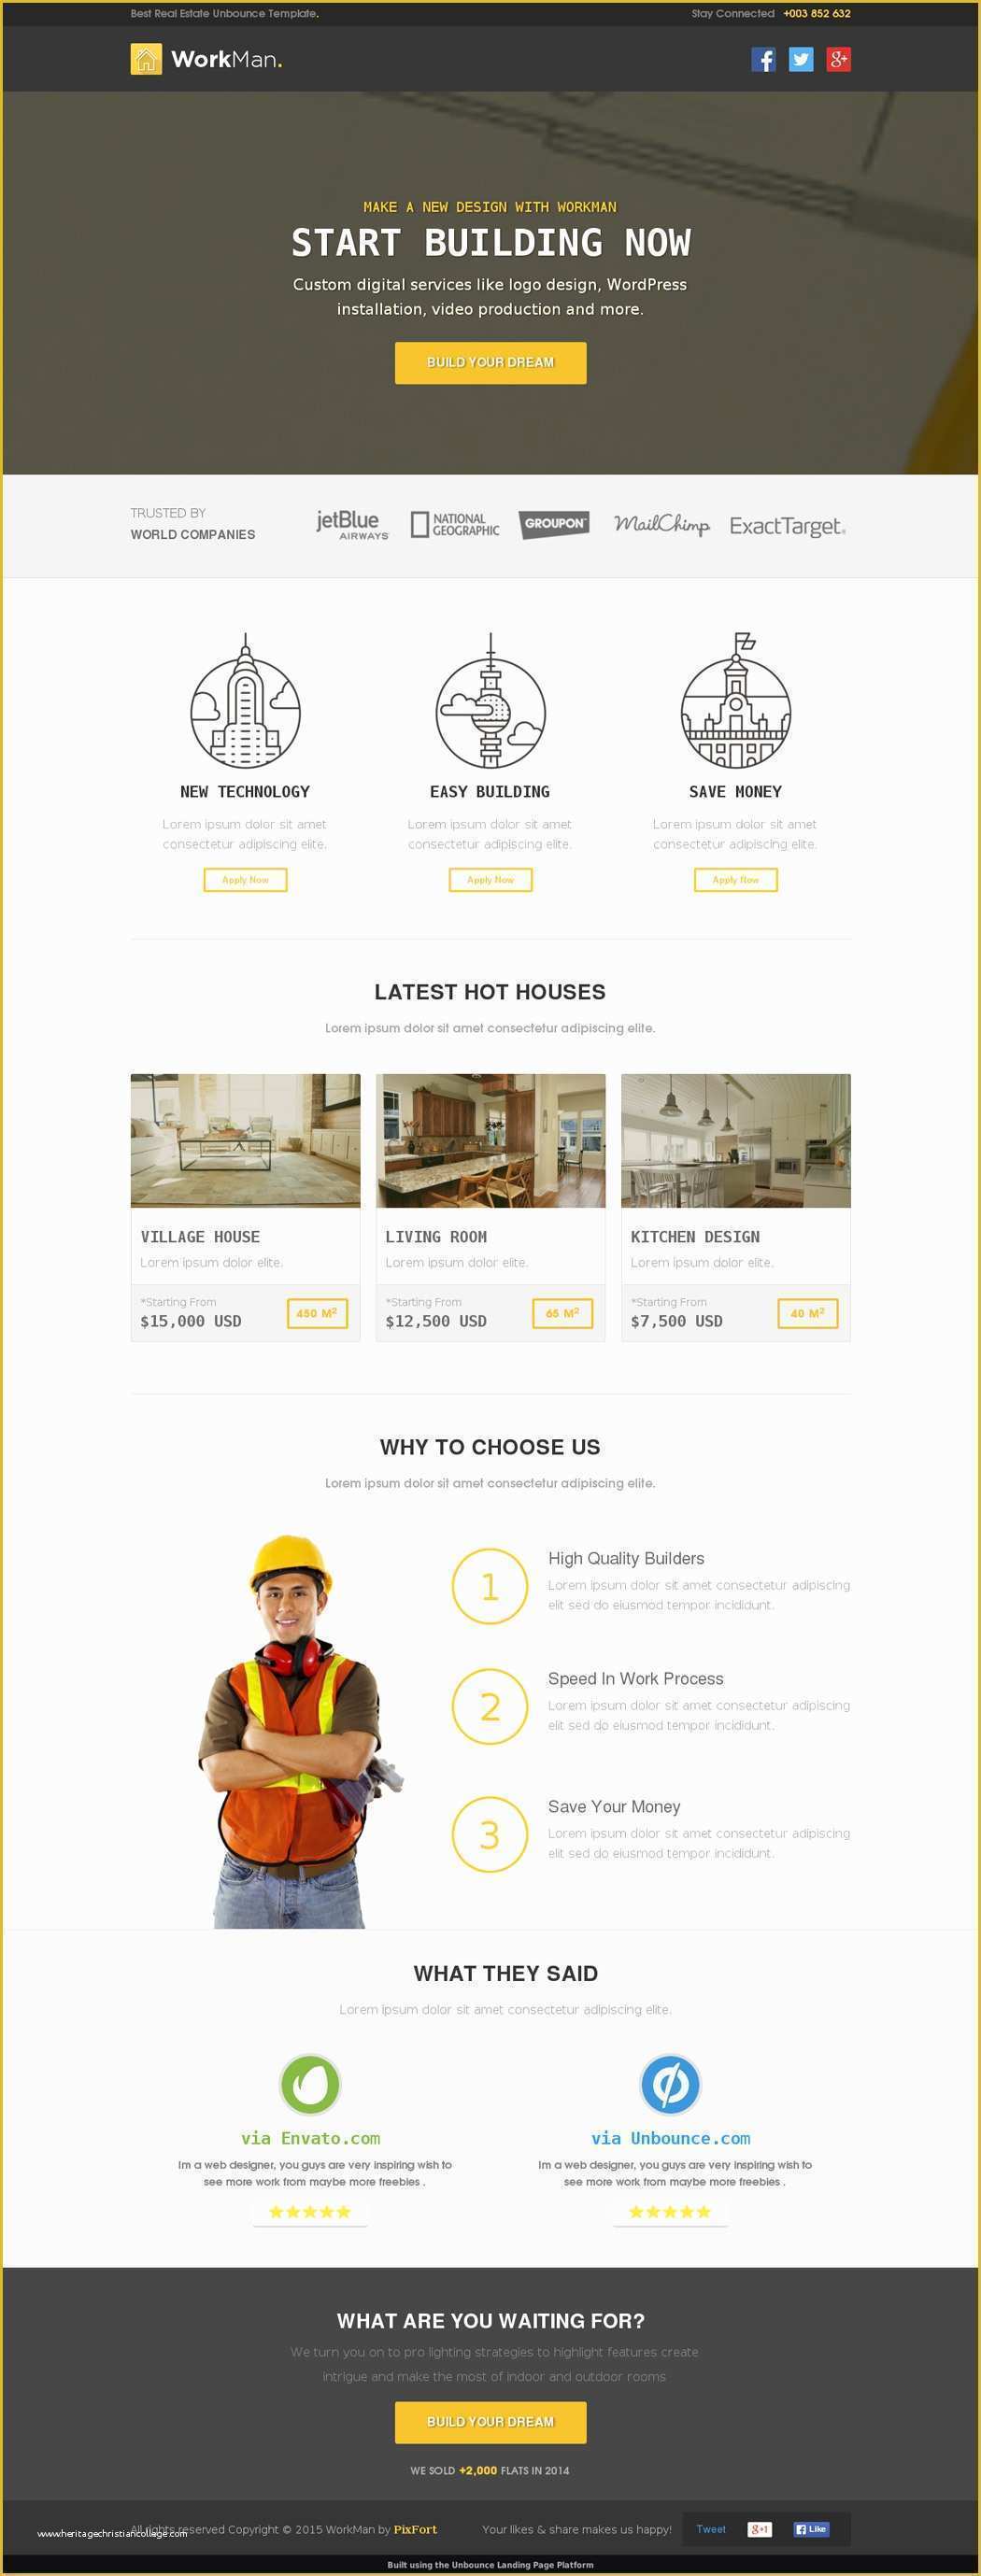 Real Estate Landing Page Template Free Of 5 Real Estate Landing Page Templates for Your Appraisal